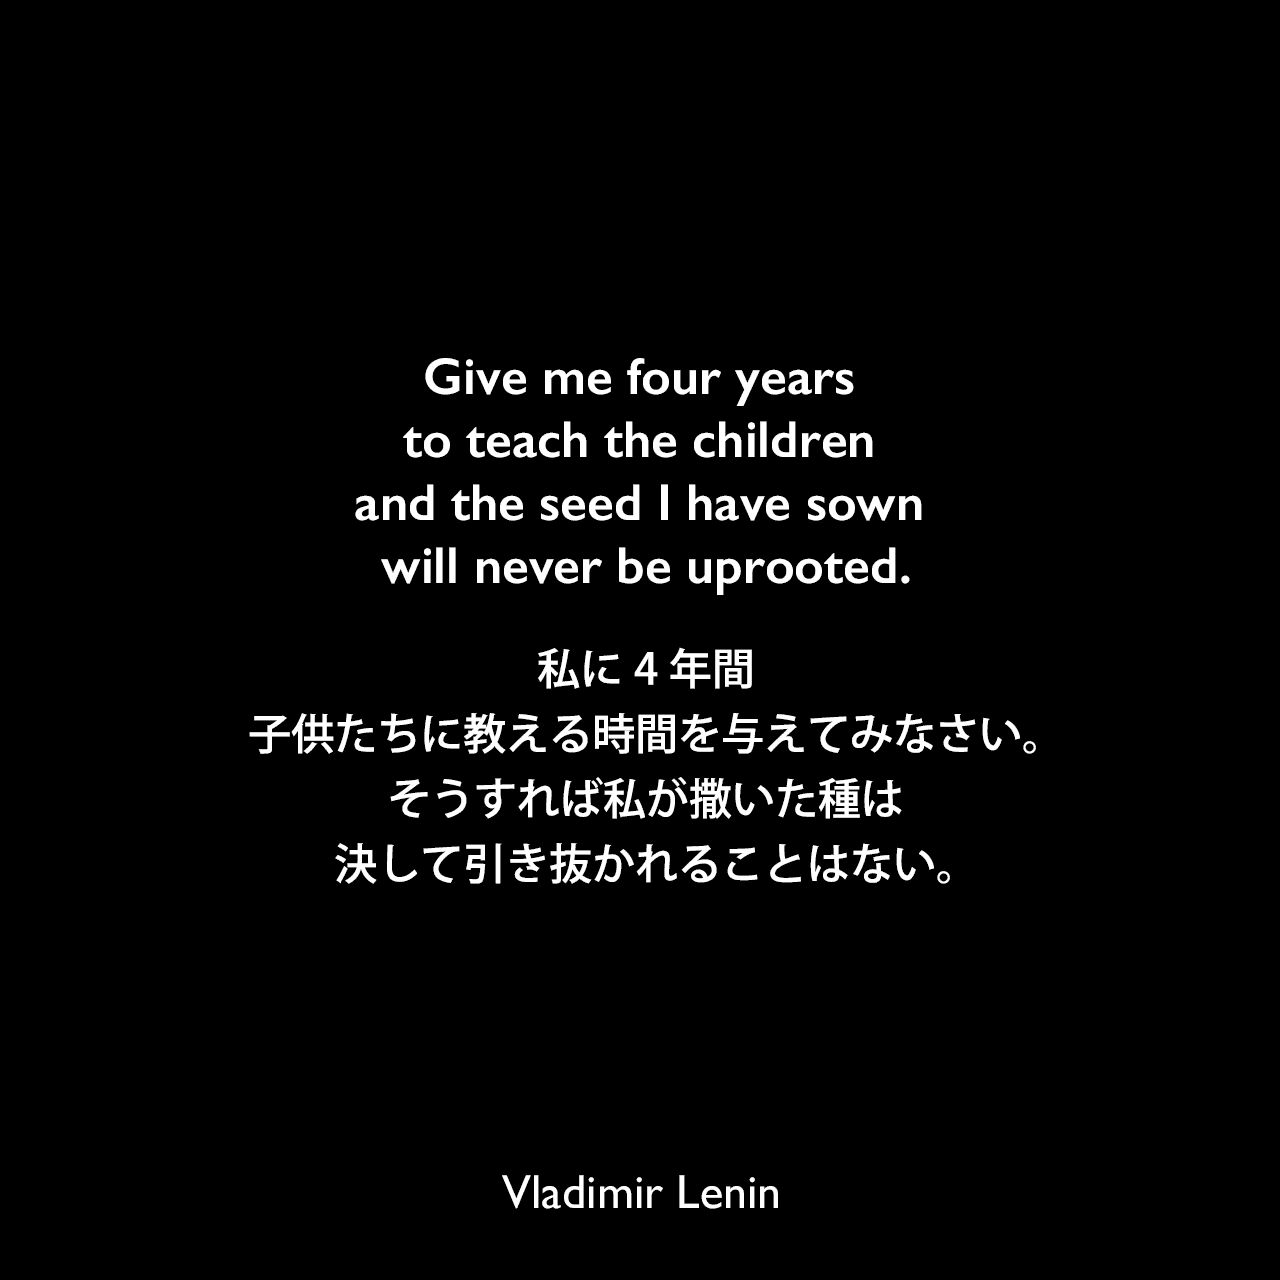 Give me four years to teach the children and the seed I have sown will never be uprooted.私に4年間、子供たちに教える時間を与えてみなさい。そうすれば私が撒いた種は決して引き抜かれることはない。Vladimir Lenin